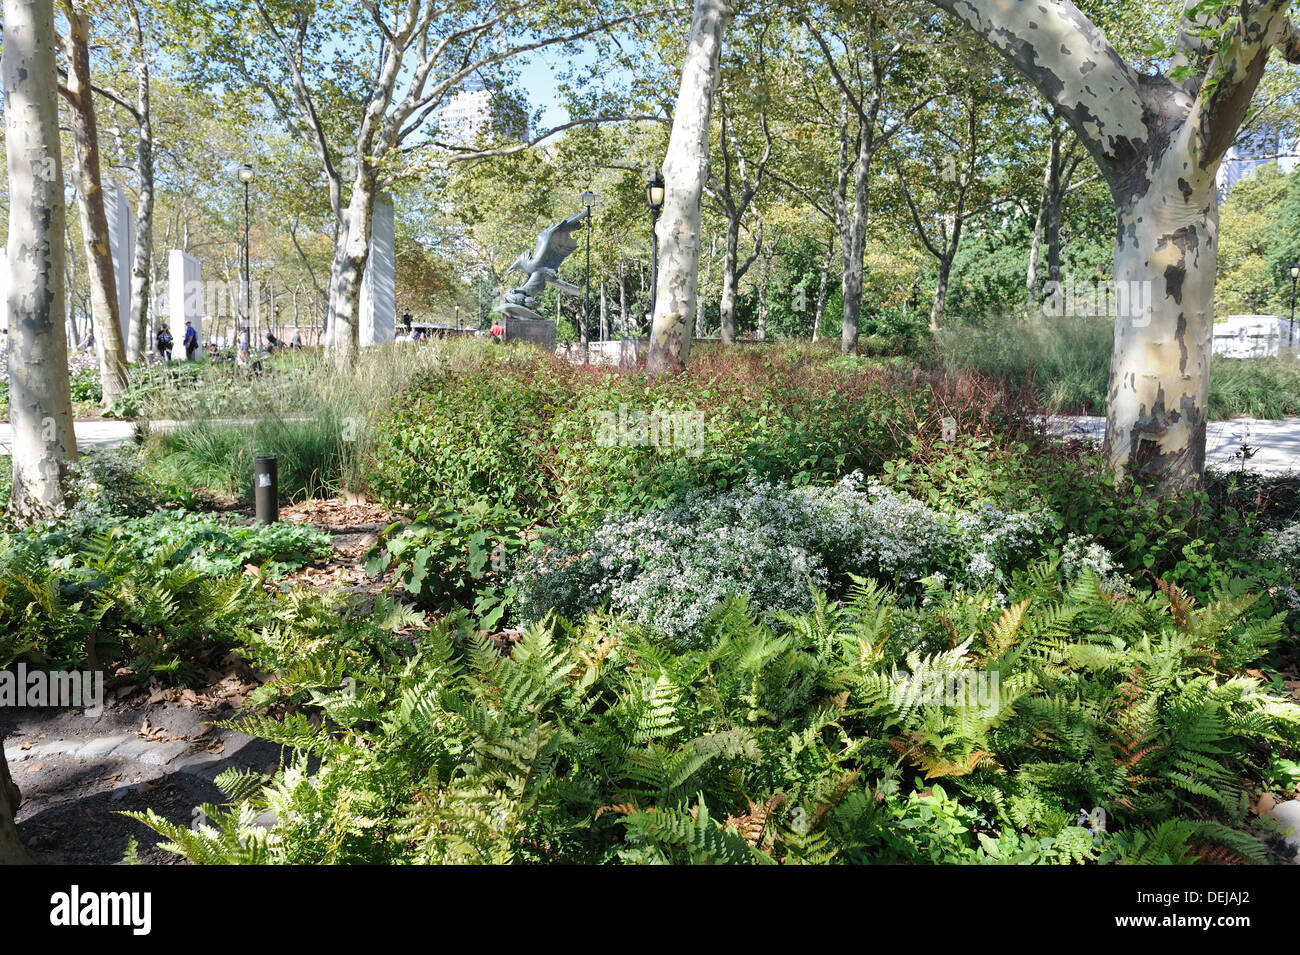 Historic Battery Park, planted with Dryopteris autumnalis (autumn ferns), Eurybia (white wood asters) and Virginia jumpseed. Stock Photo